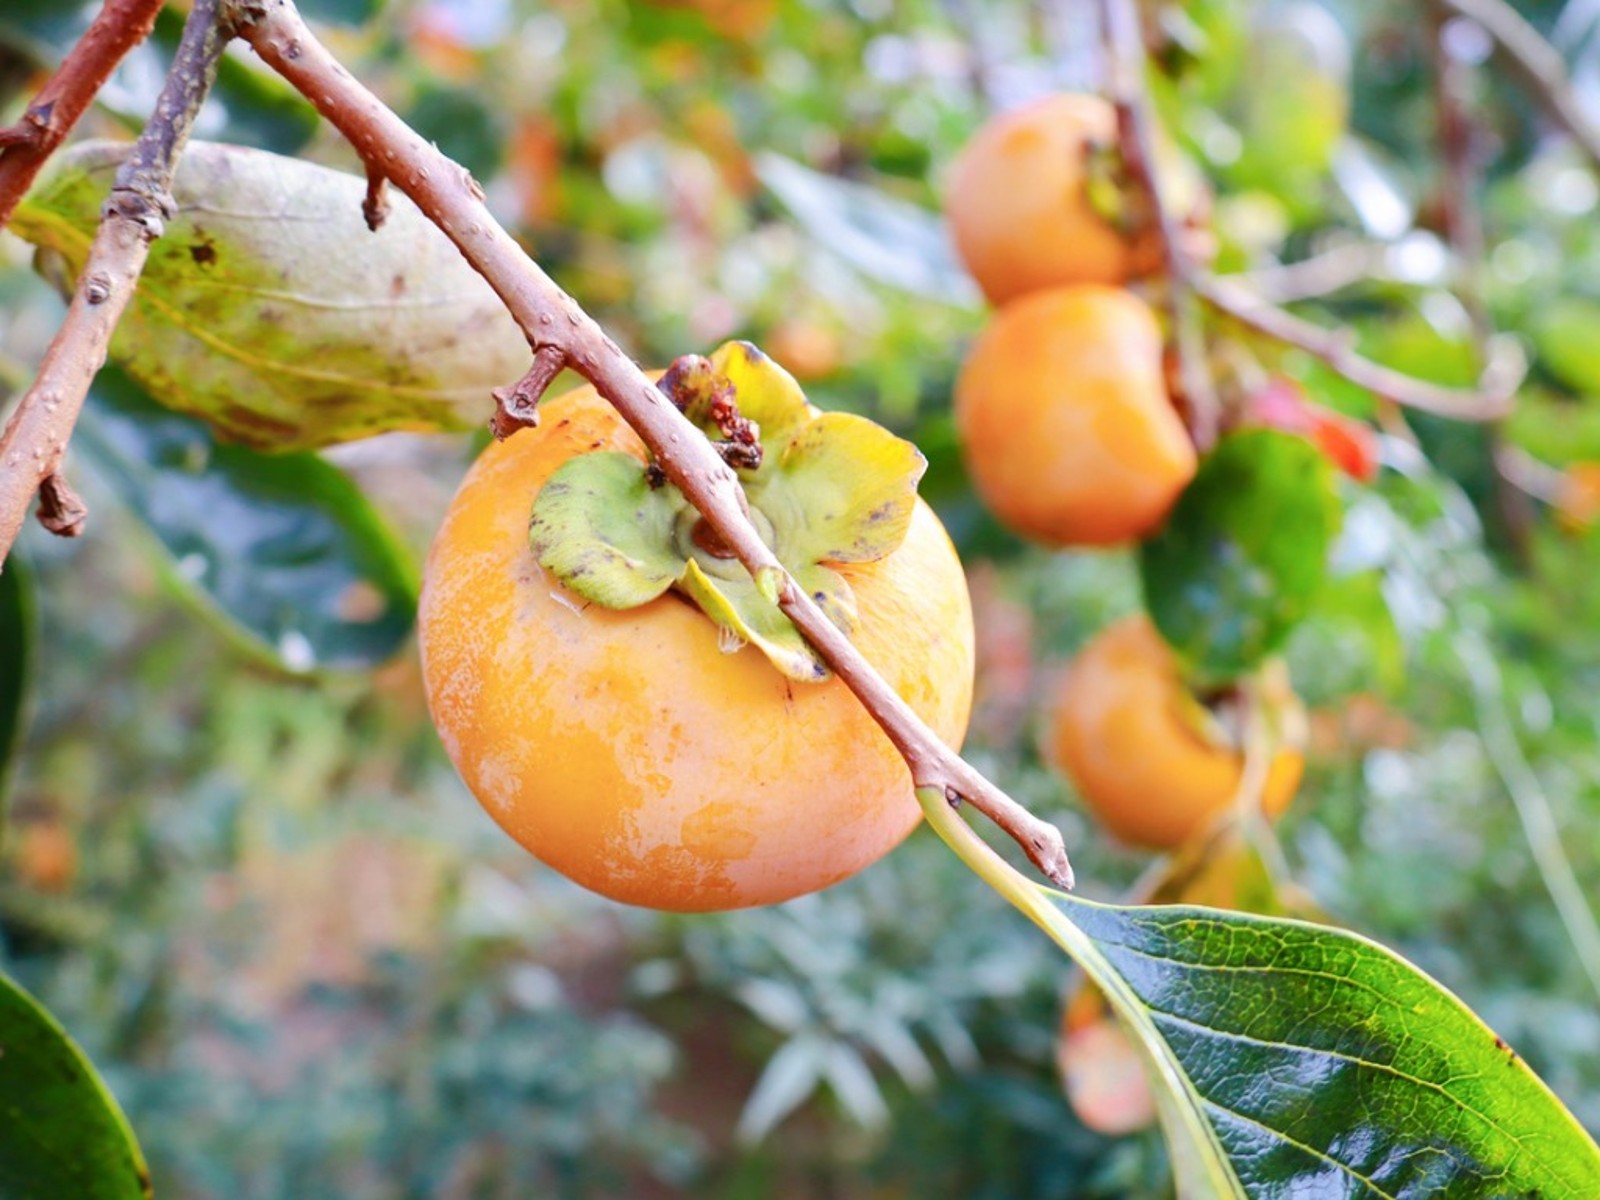 Several orange persimmon hanging on the tree branches